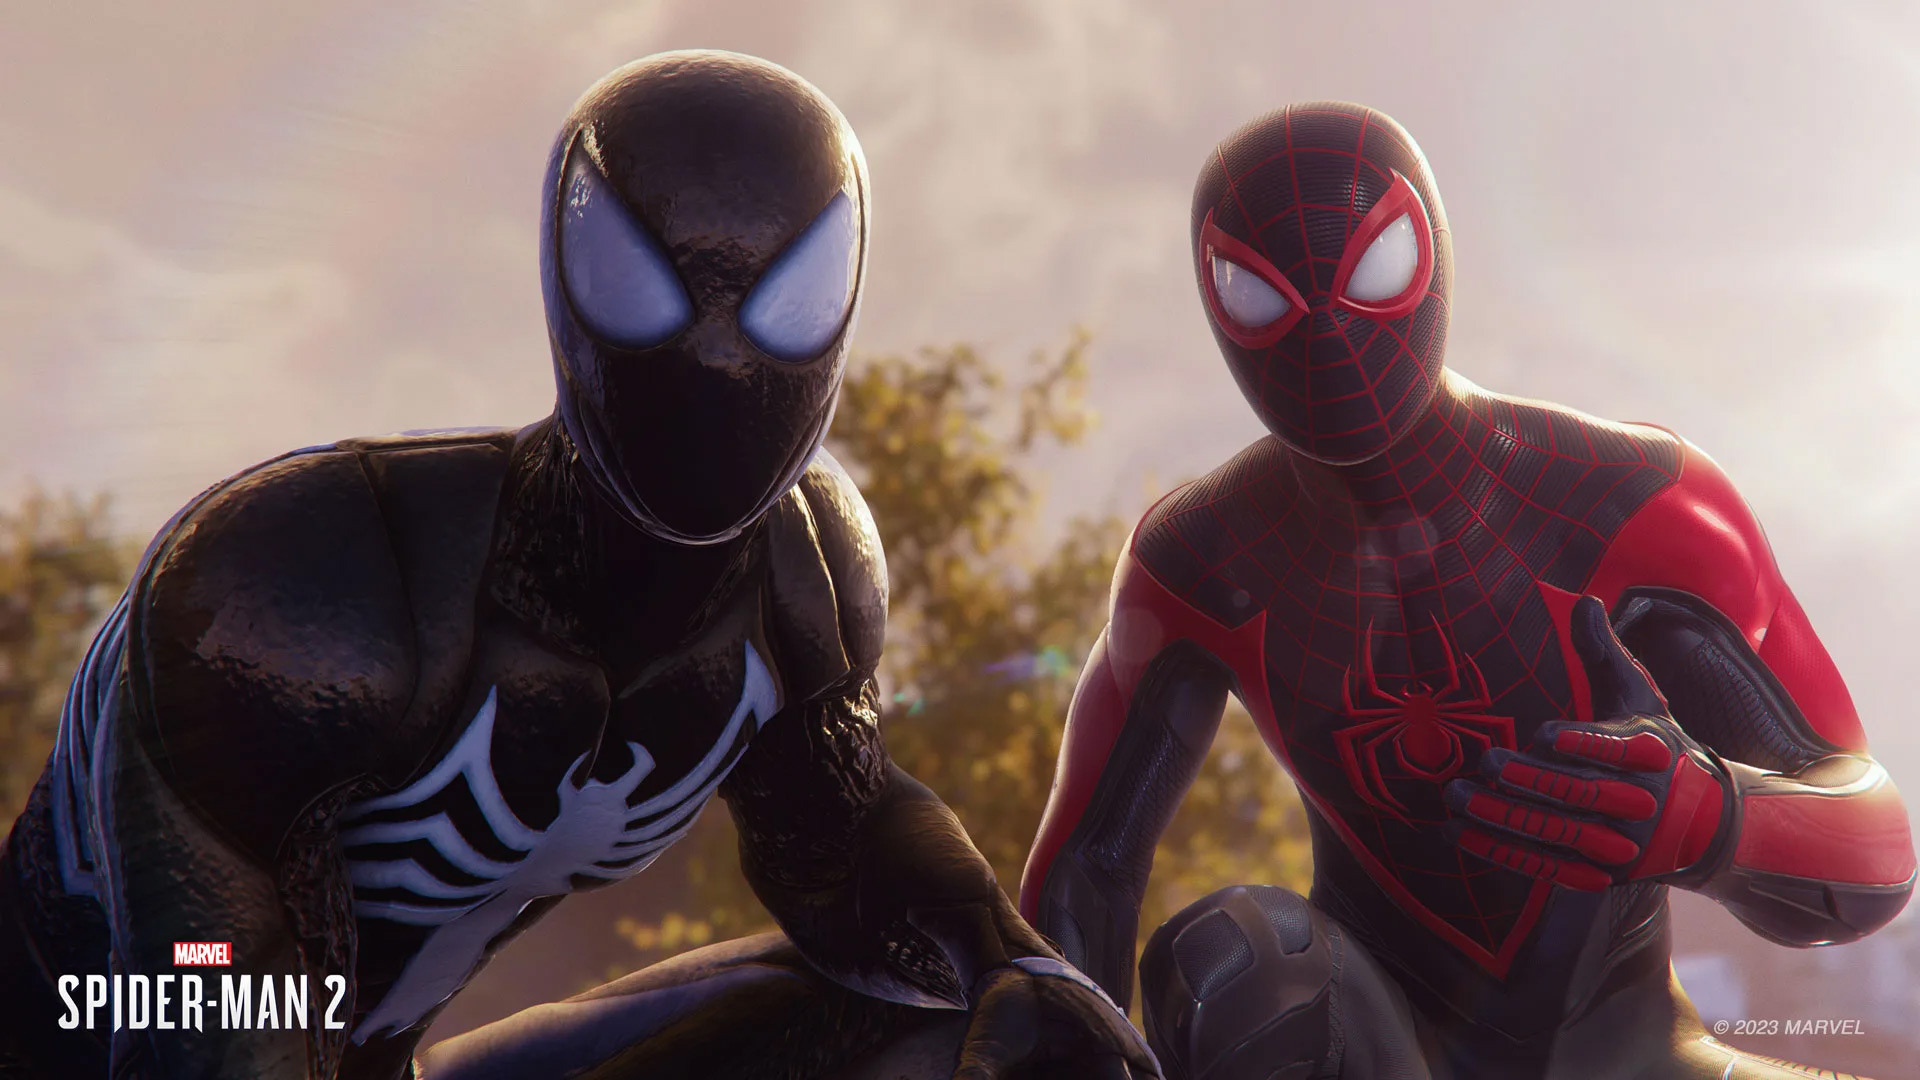 Insomniac Games has finally shared gameplay of Spider-Man 2